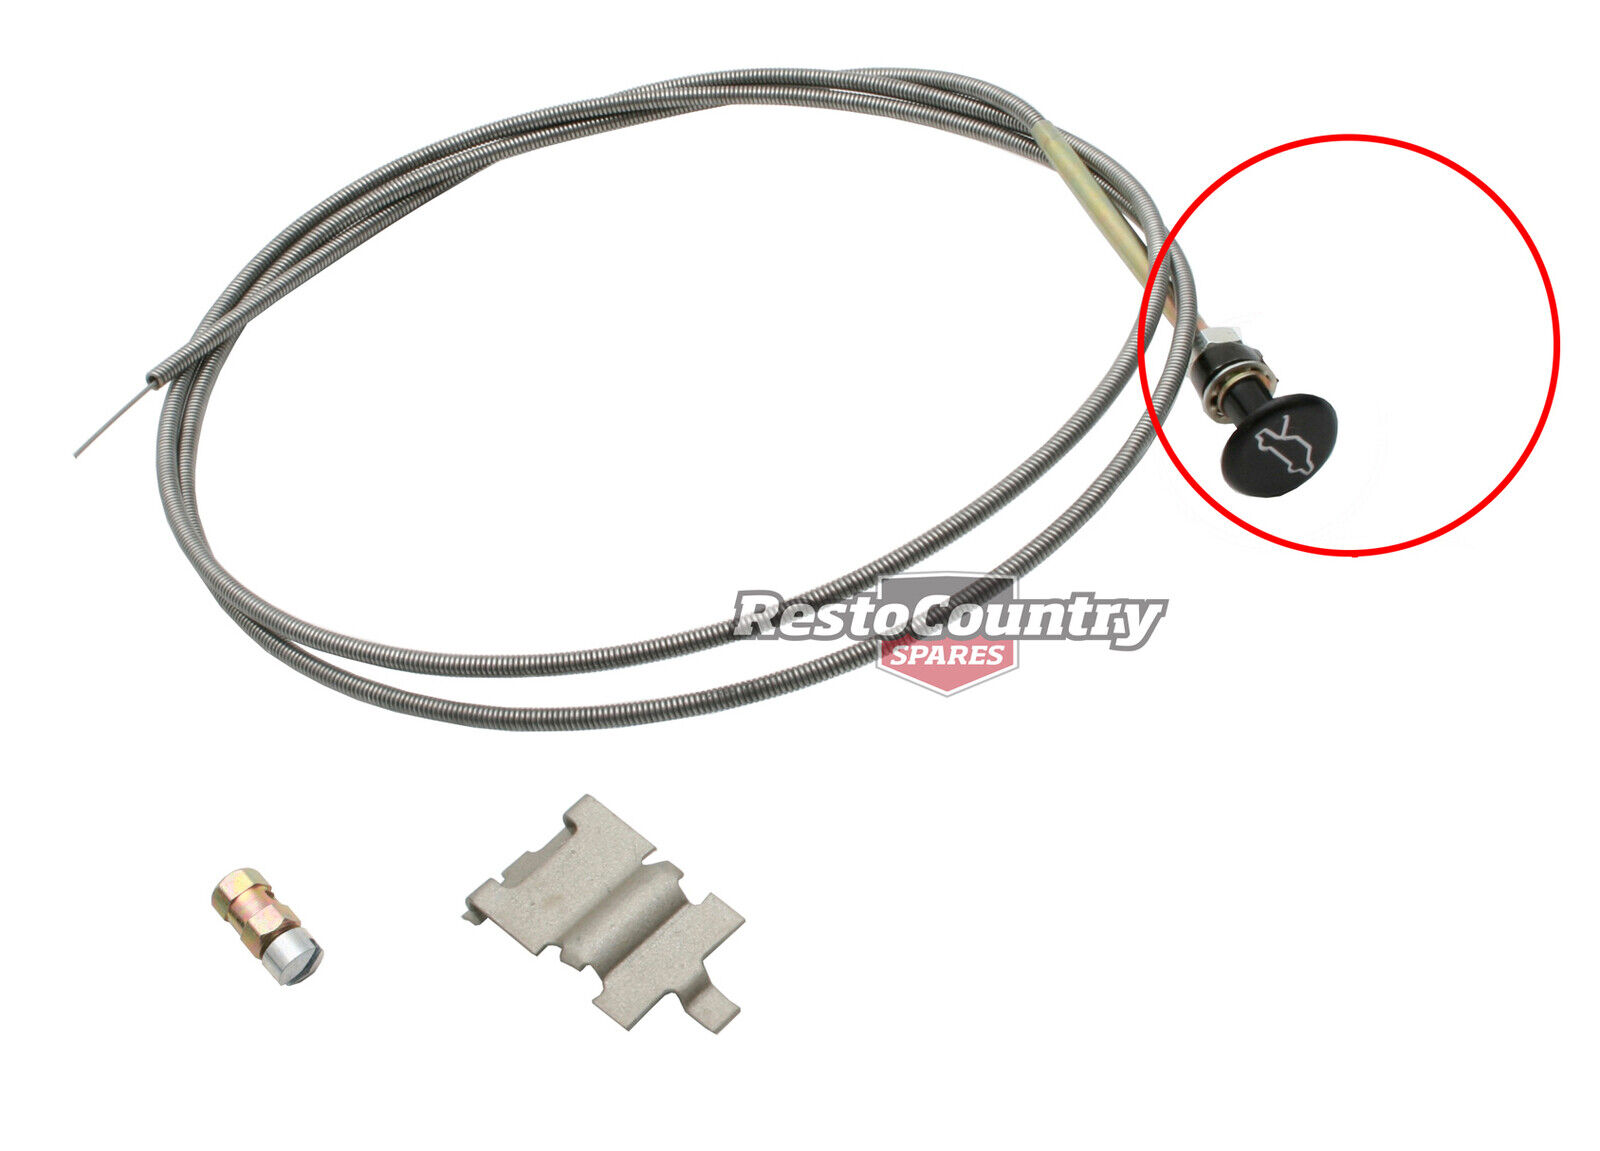 Holden Bonnet Release Cable With Round Knob +Fitting Kit LH Early LX Torana